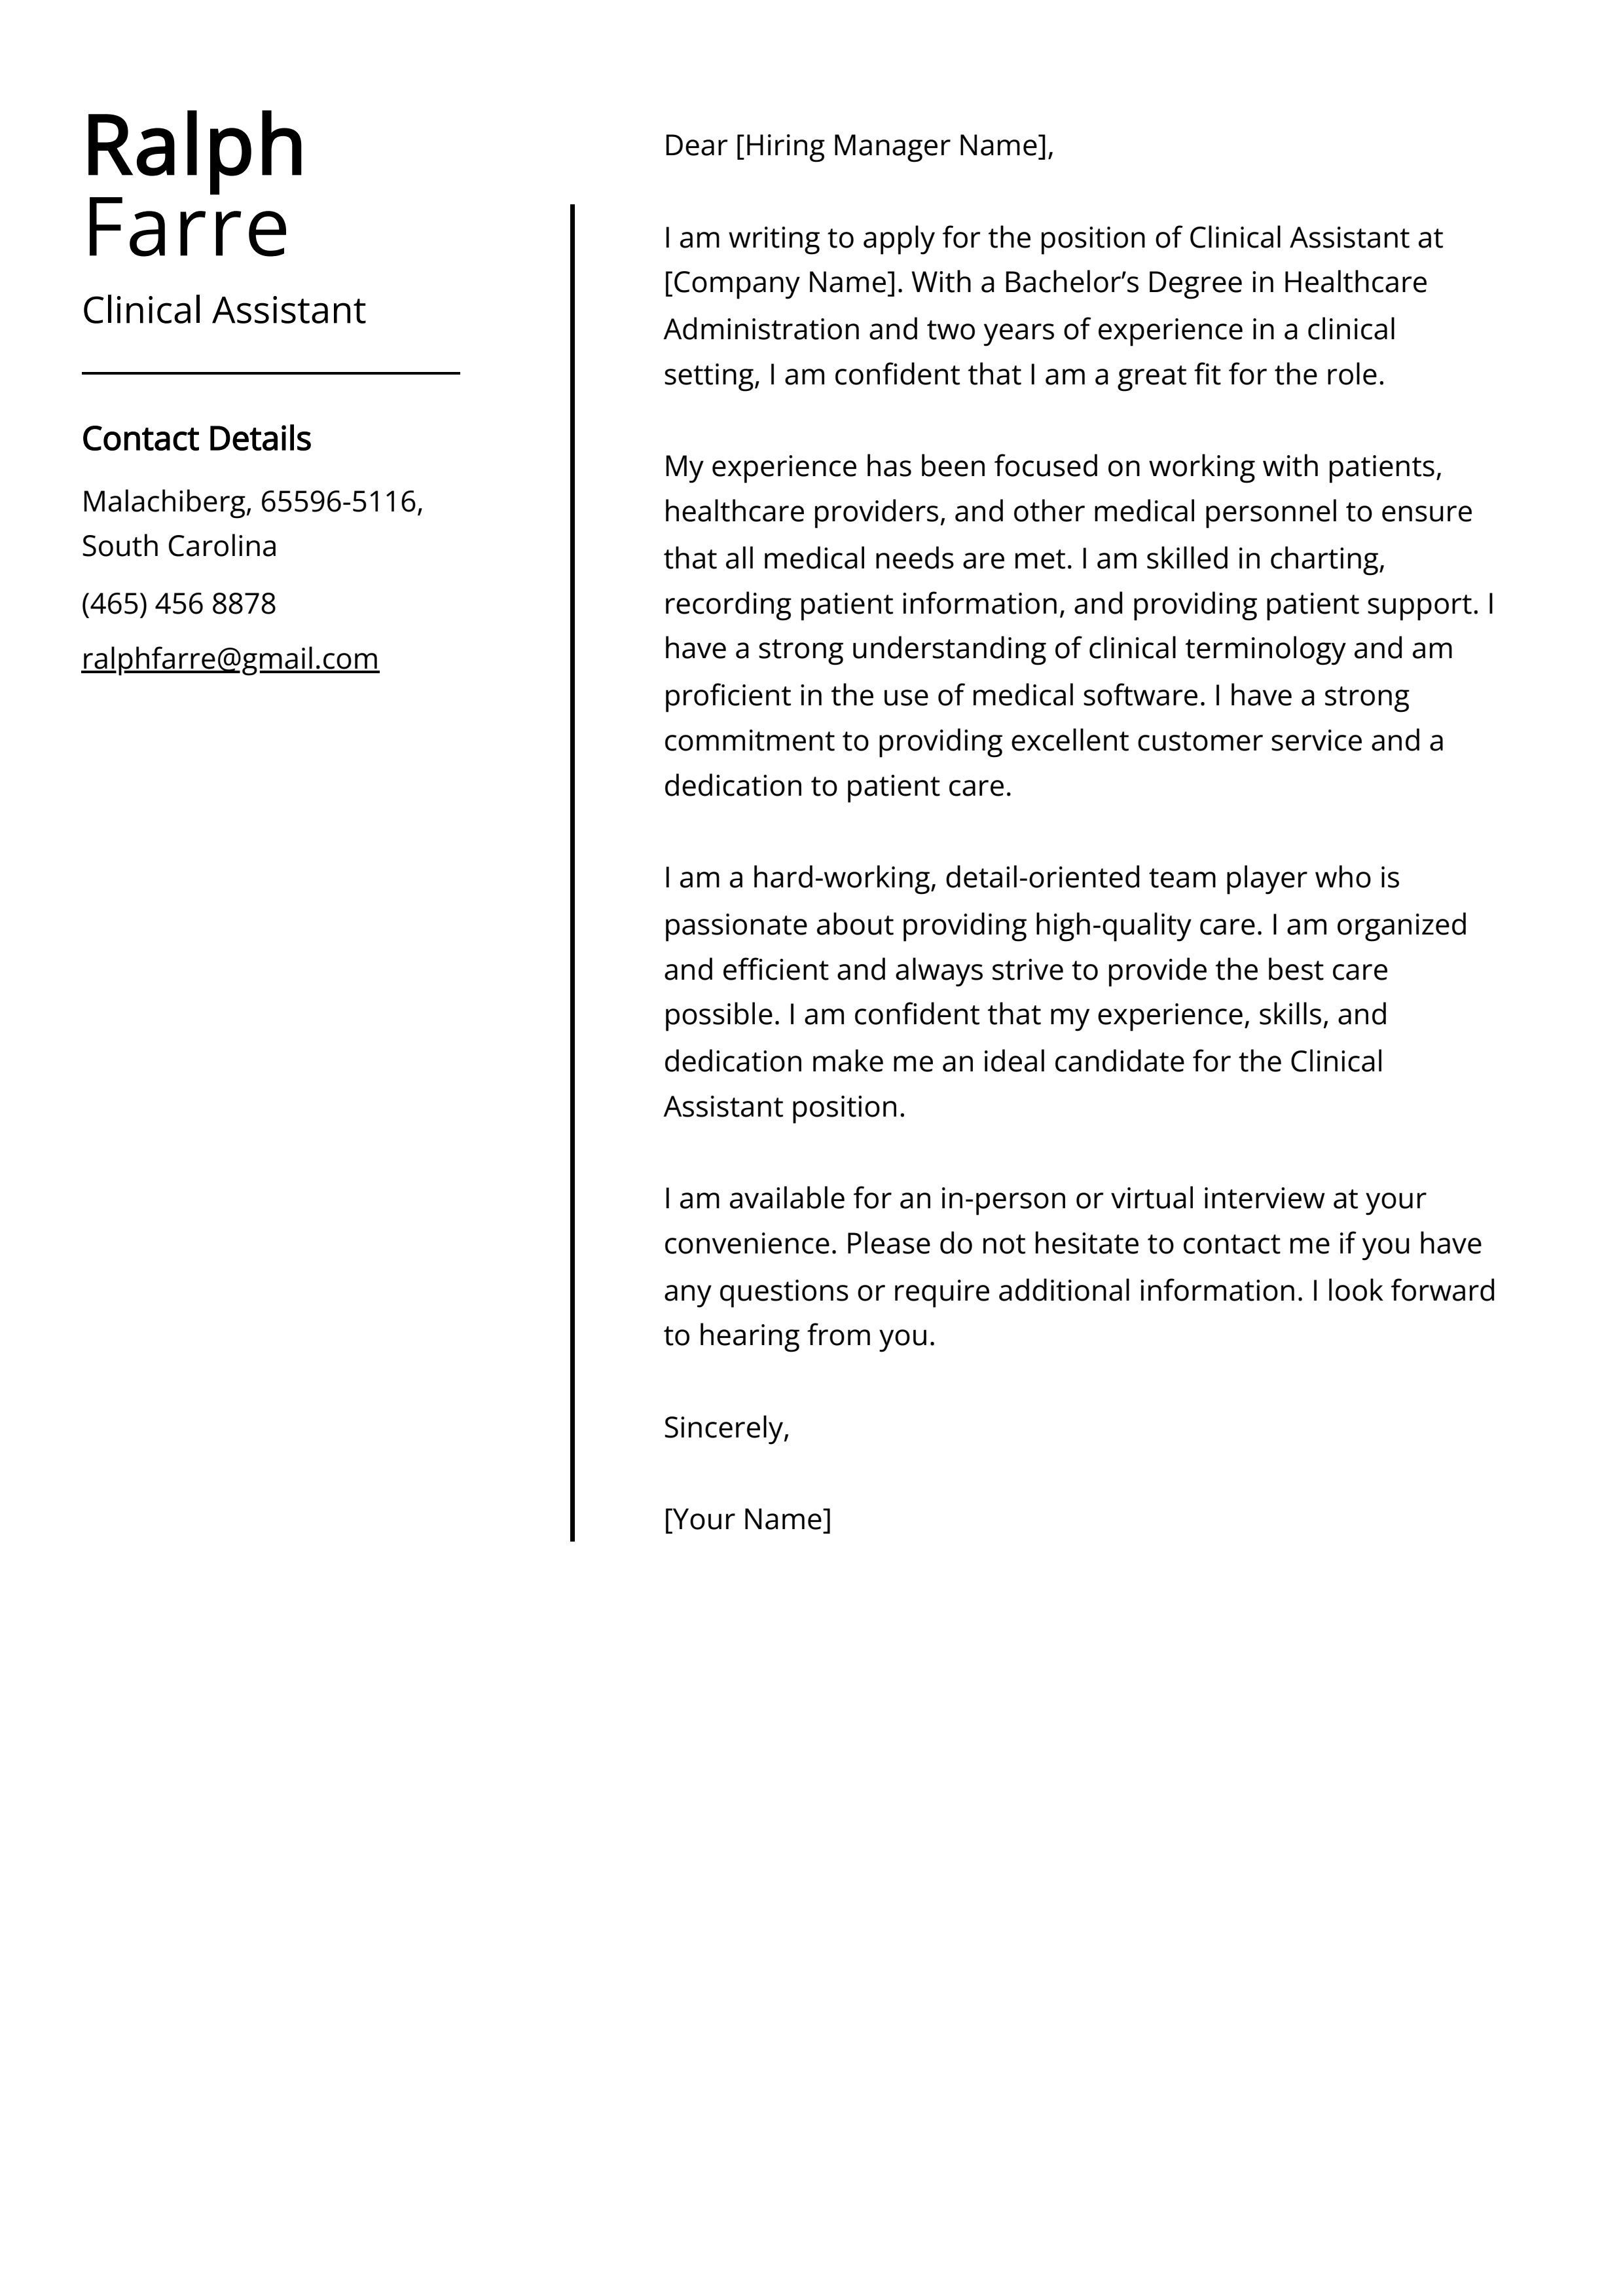 Clinical Assistant Cover Letter Example